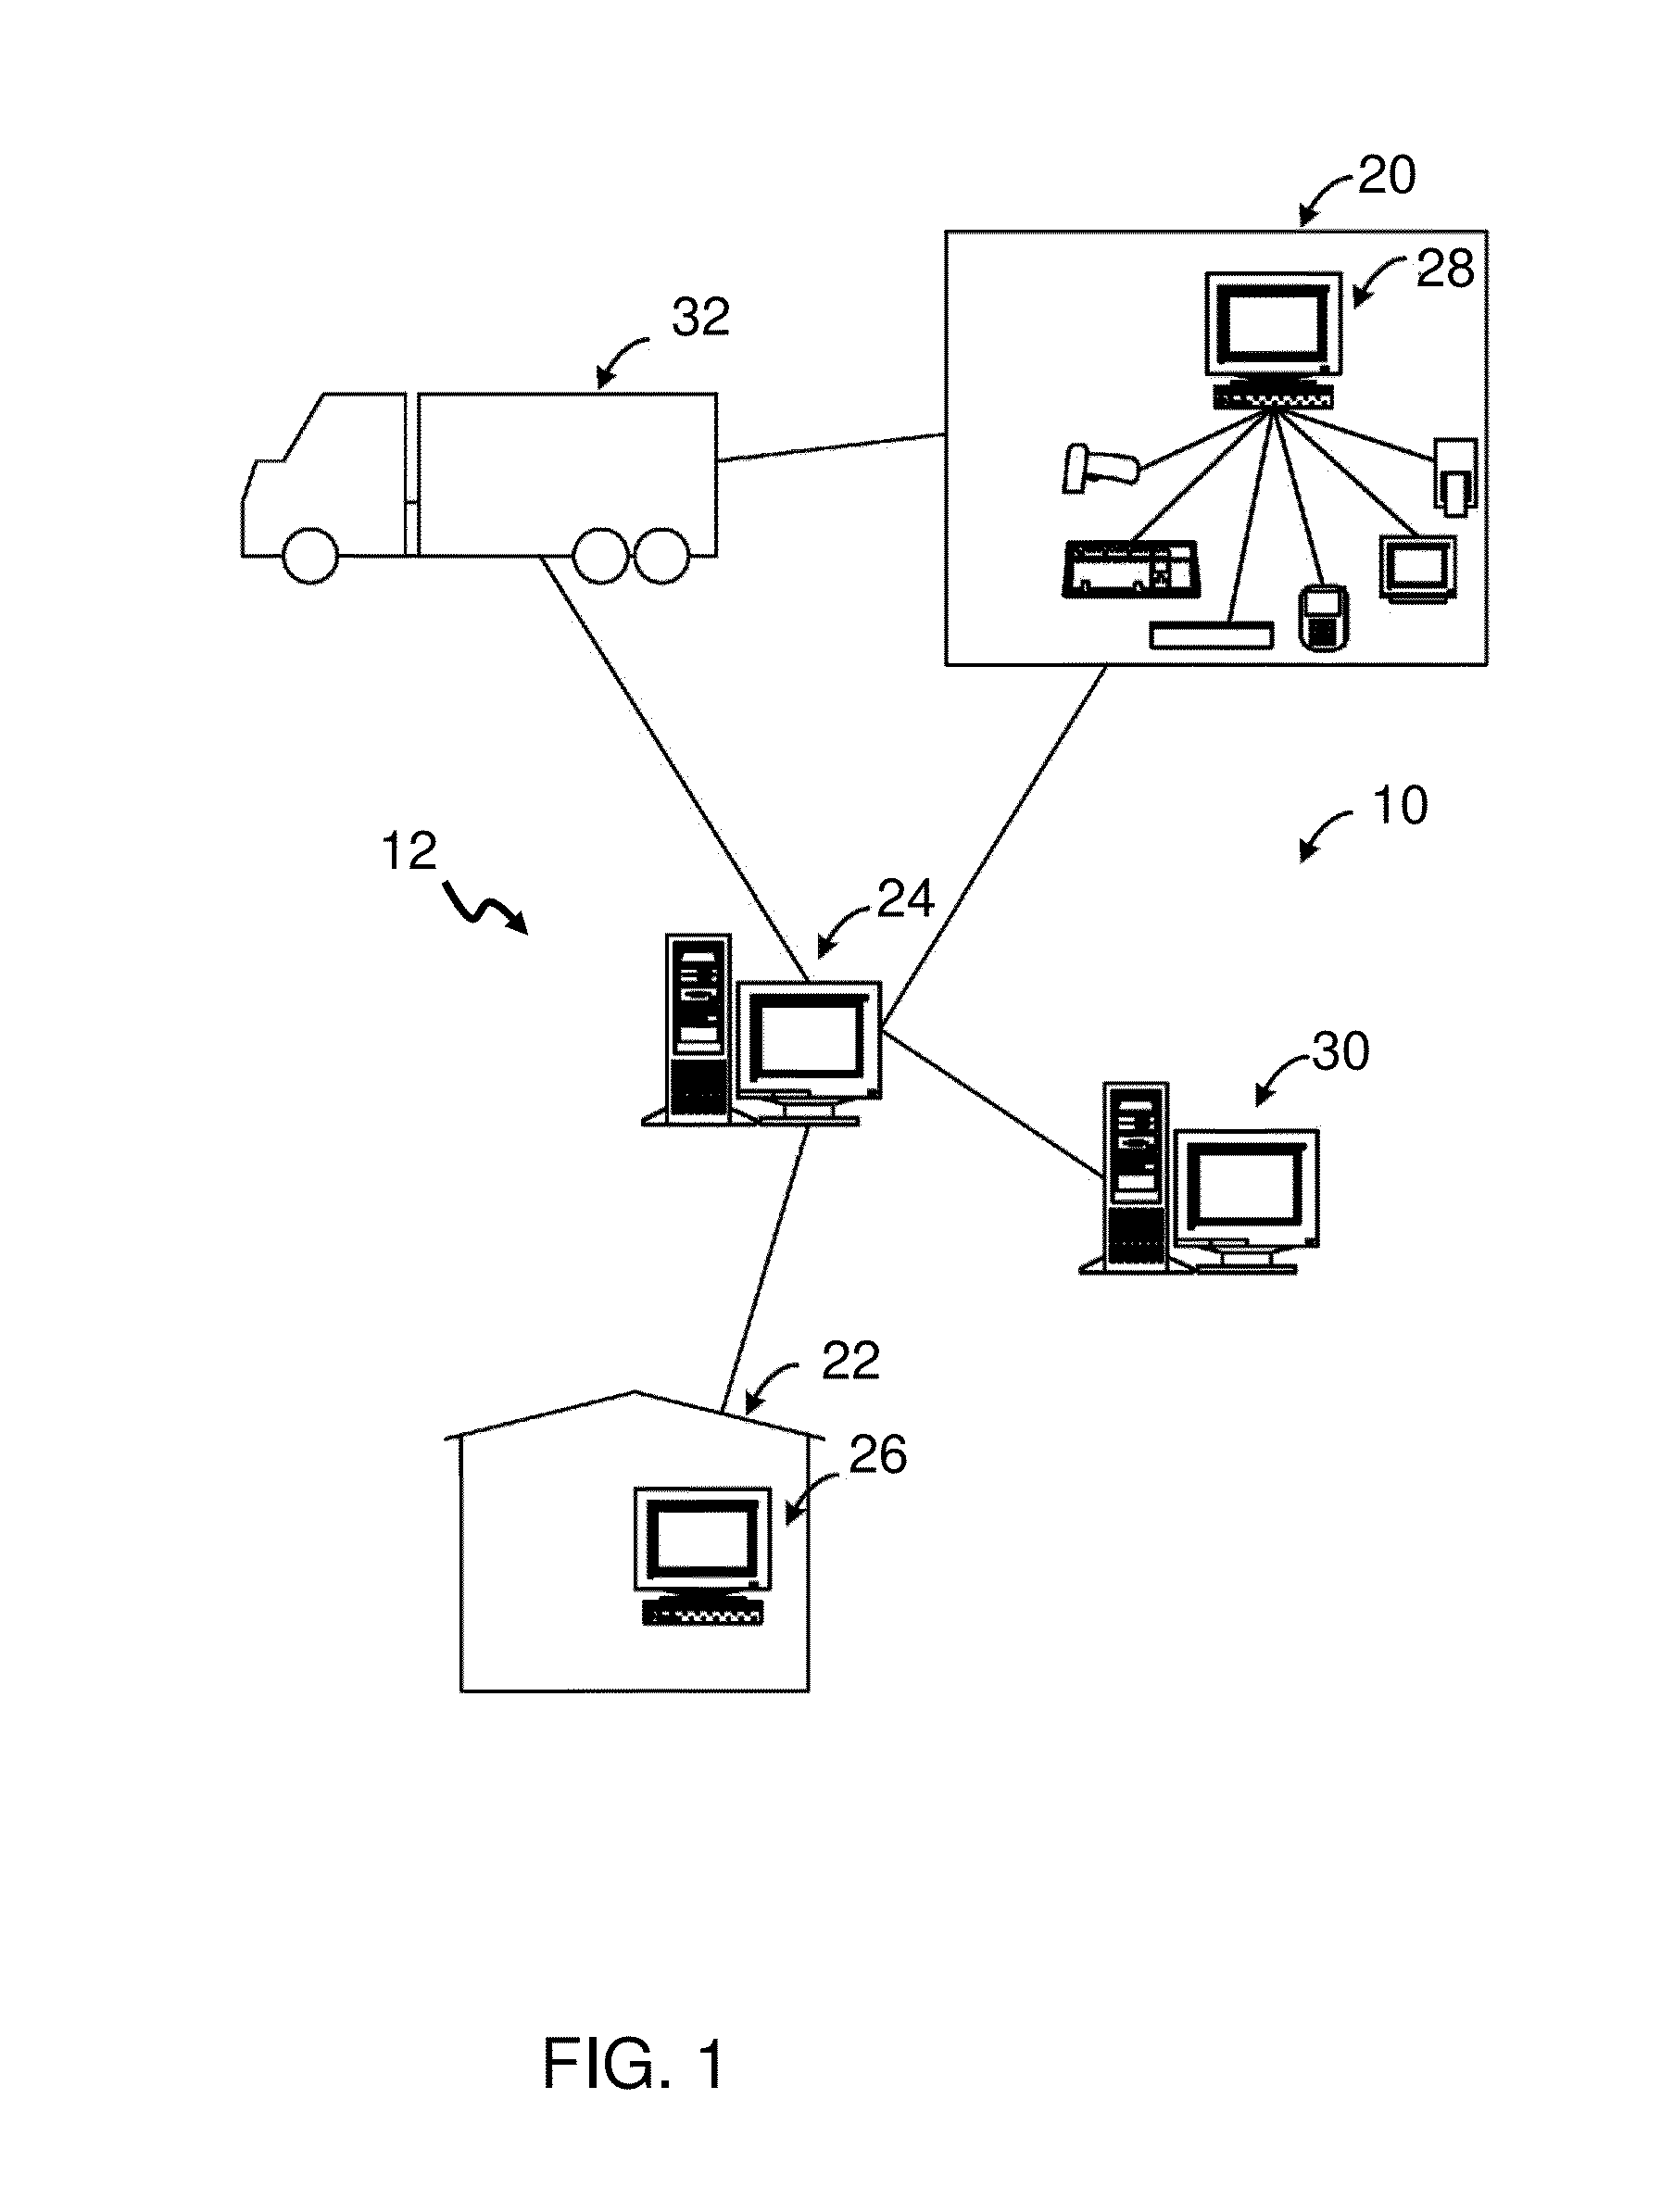 System, method, and non-transitory computer-readable storage media for allowing a customer to place orders remotely and for the order assembler to communicate directly with the customer